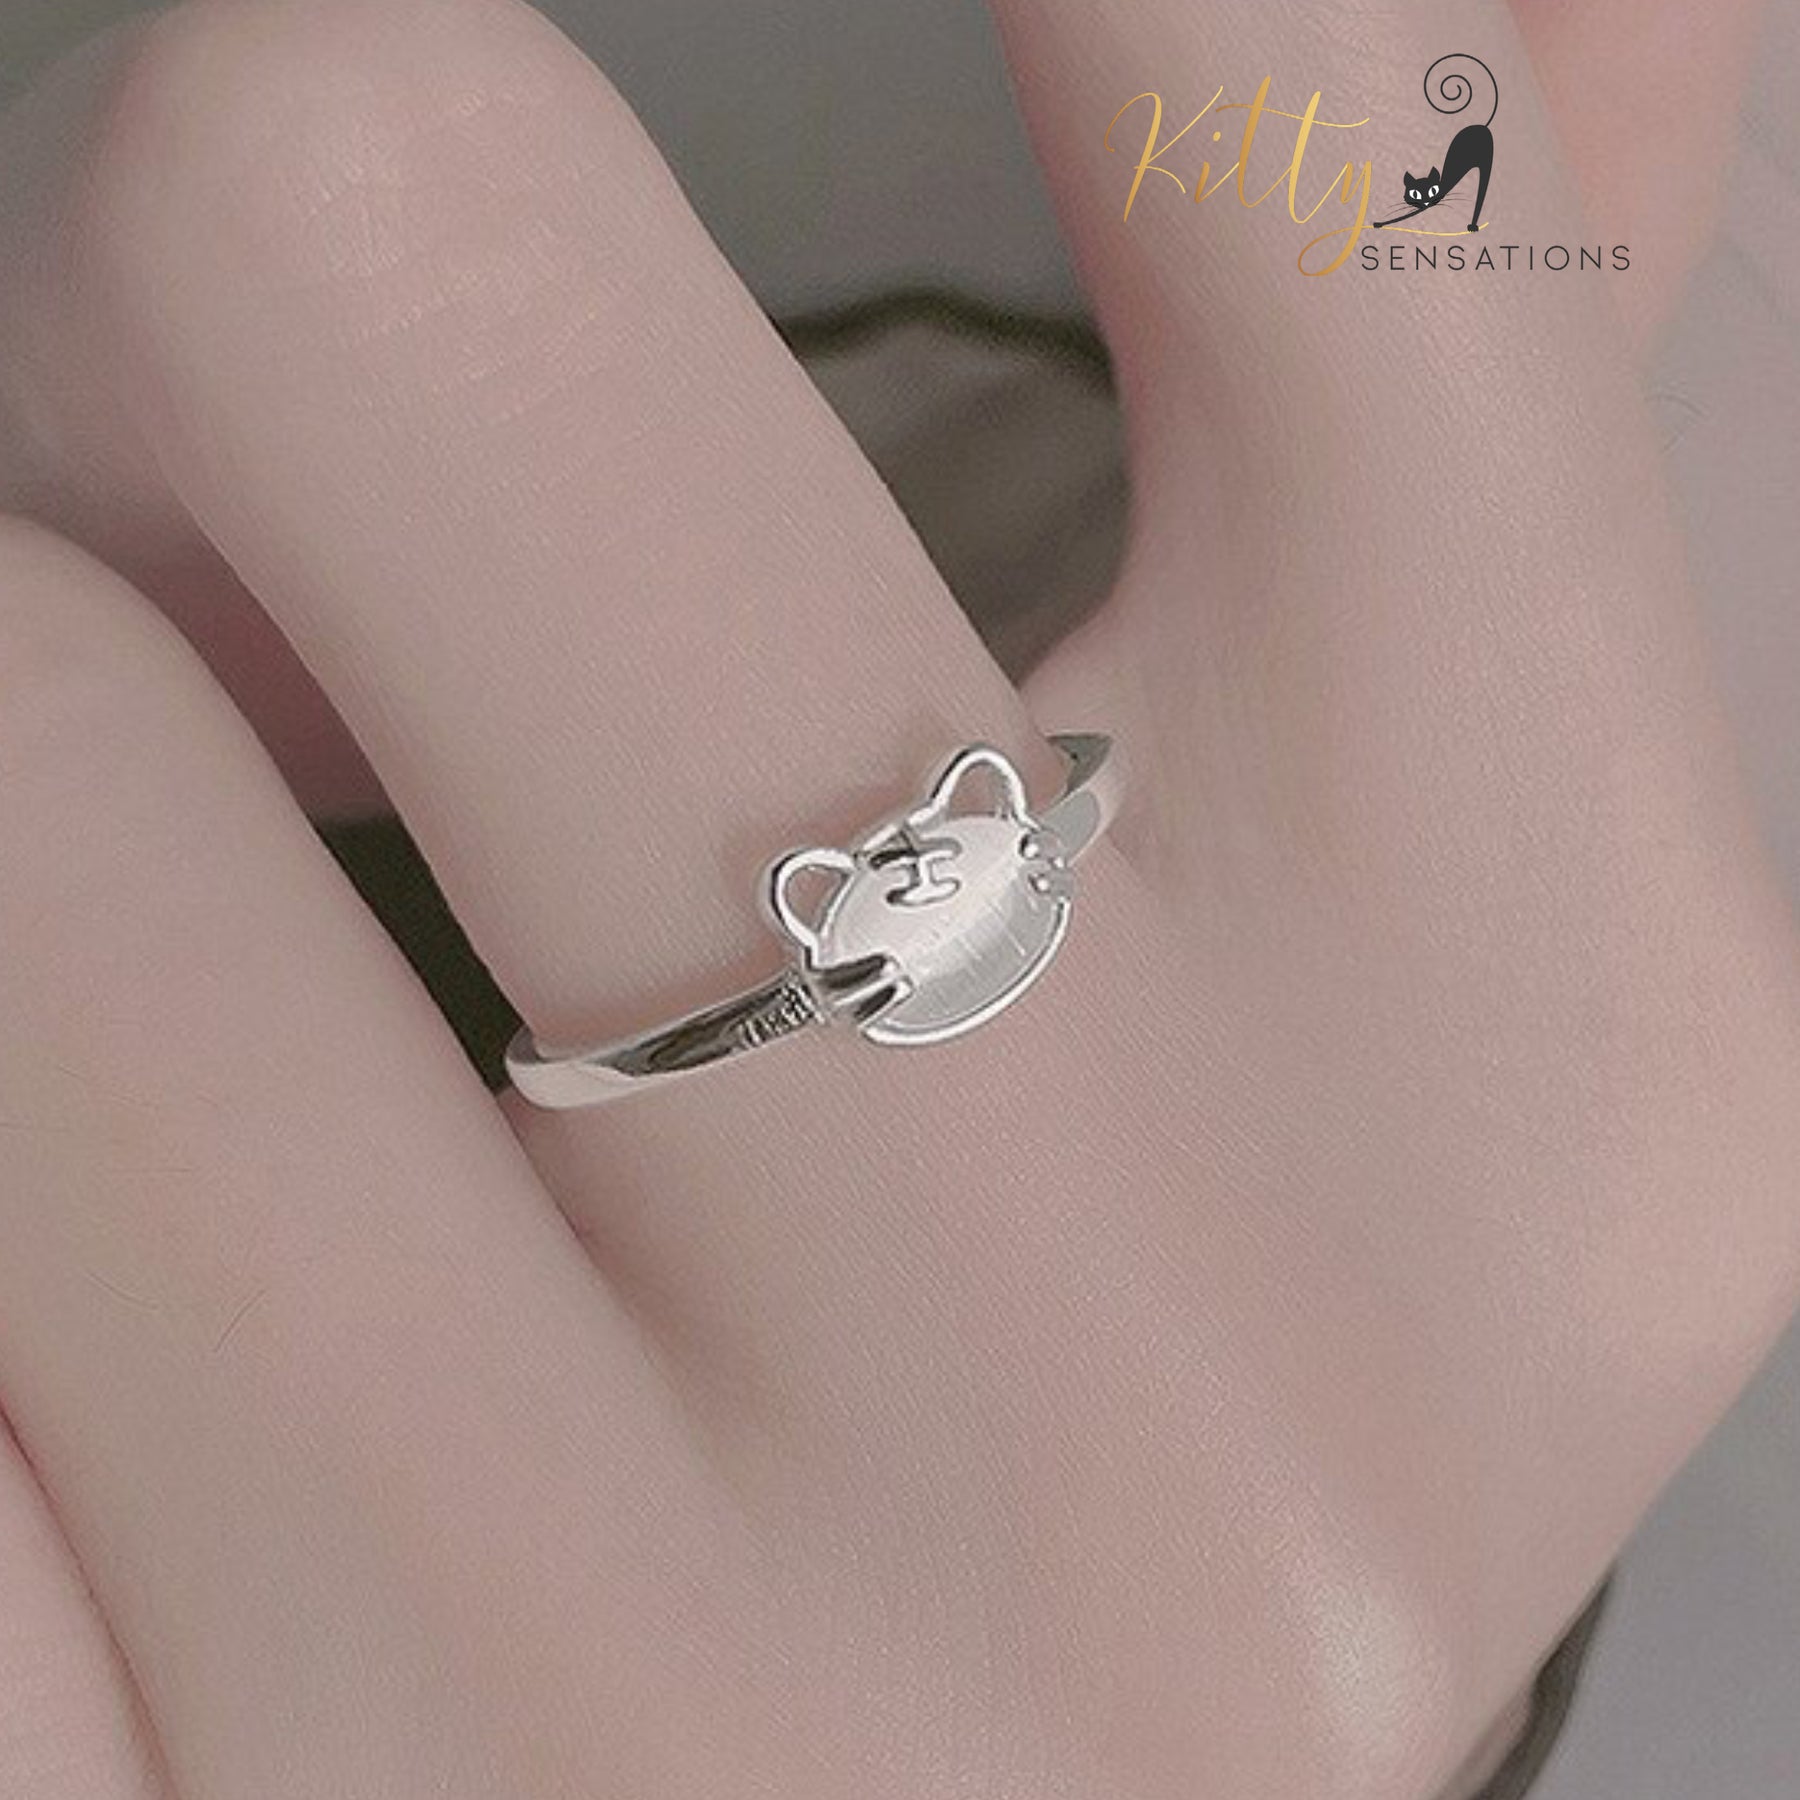 Natural Clear Quartz Cat Ring in Solid 925 Sterling Silver - Adjustable